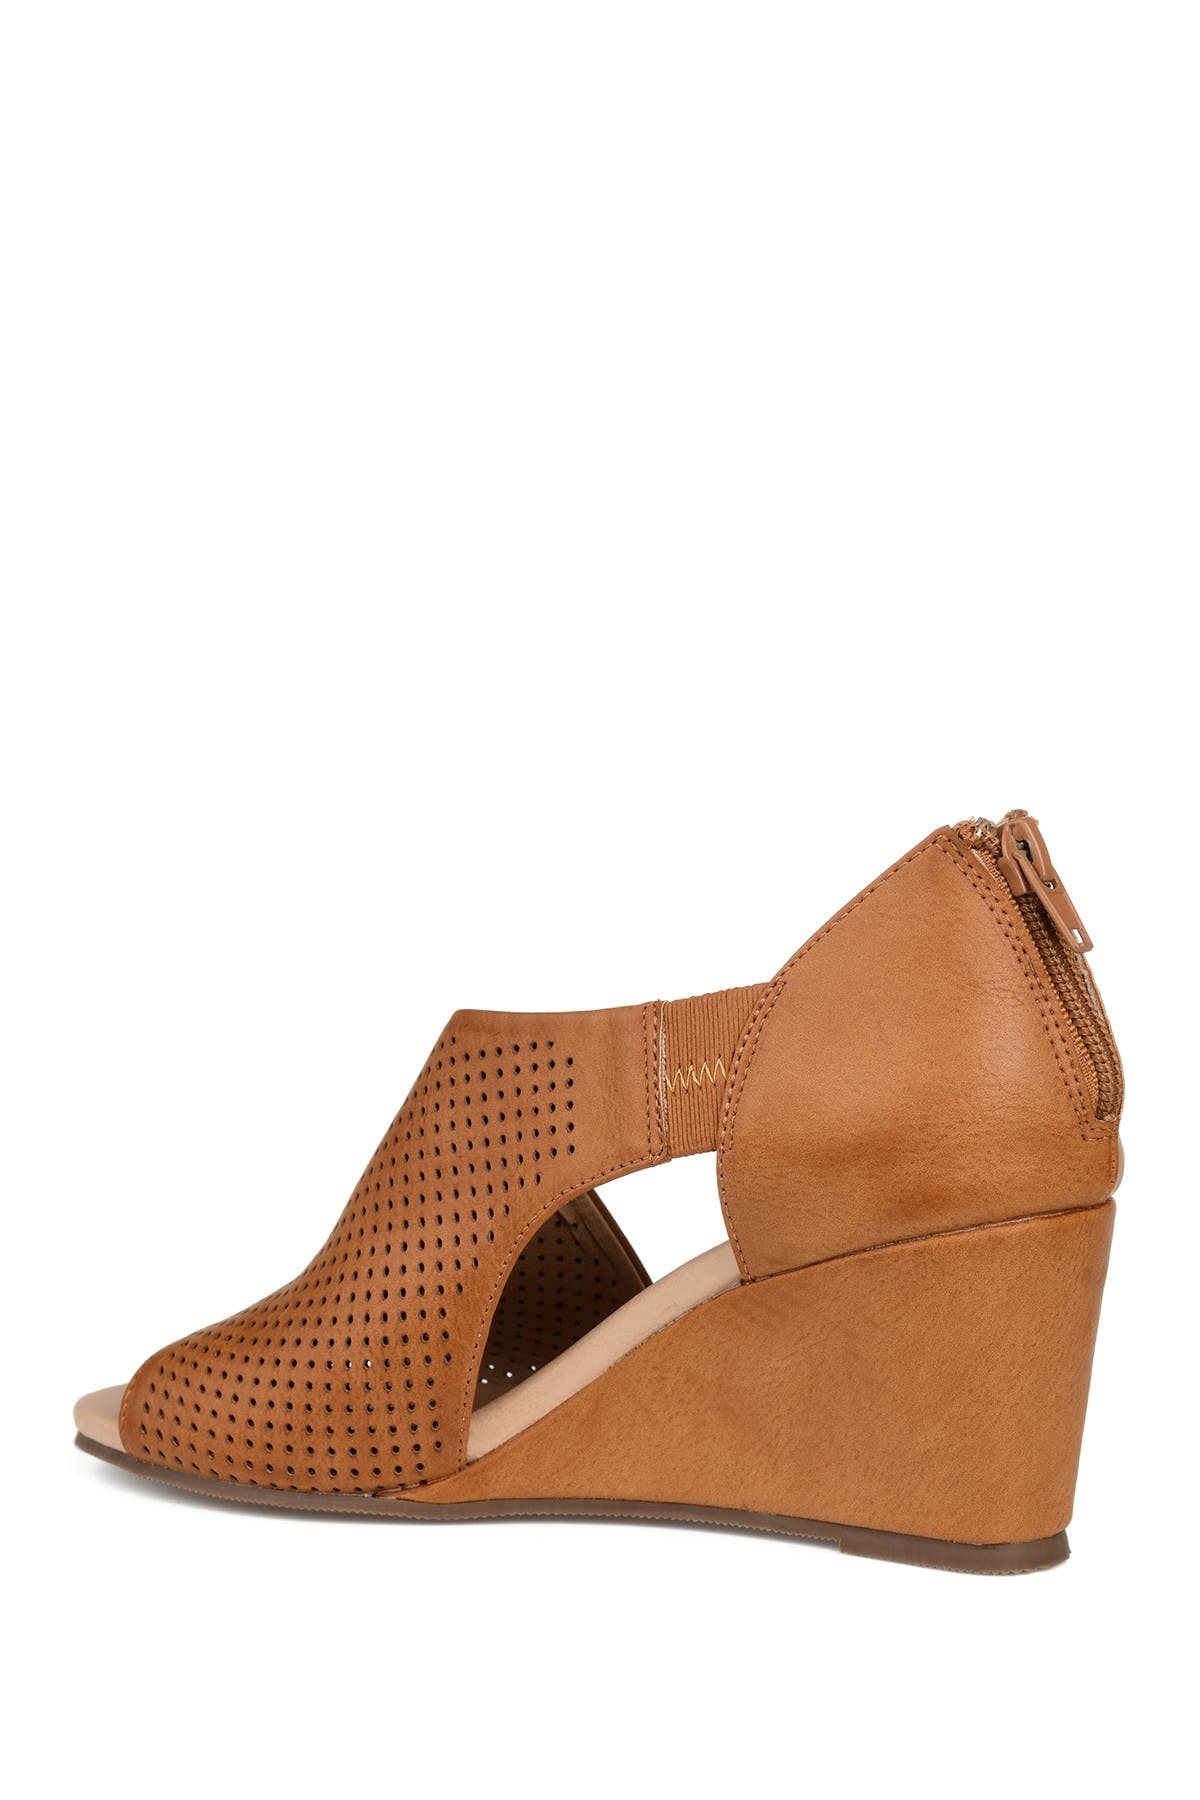 Journee Collection Aretha D'orsay Wedge Sandal In Rust/copper1